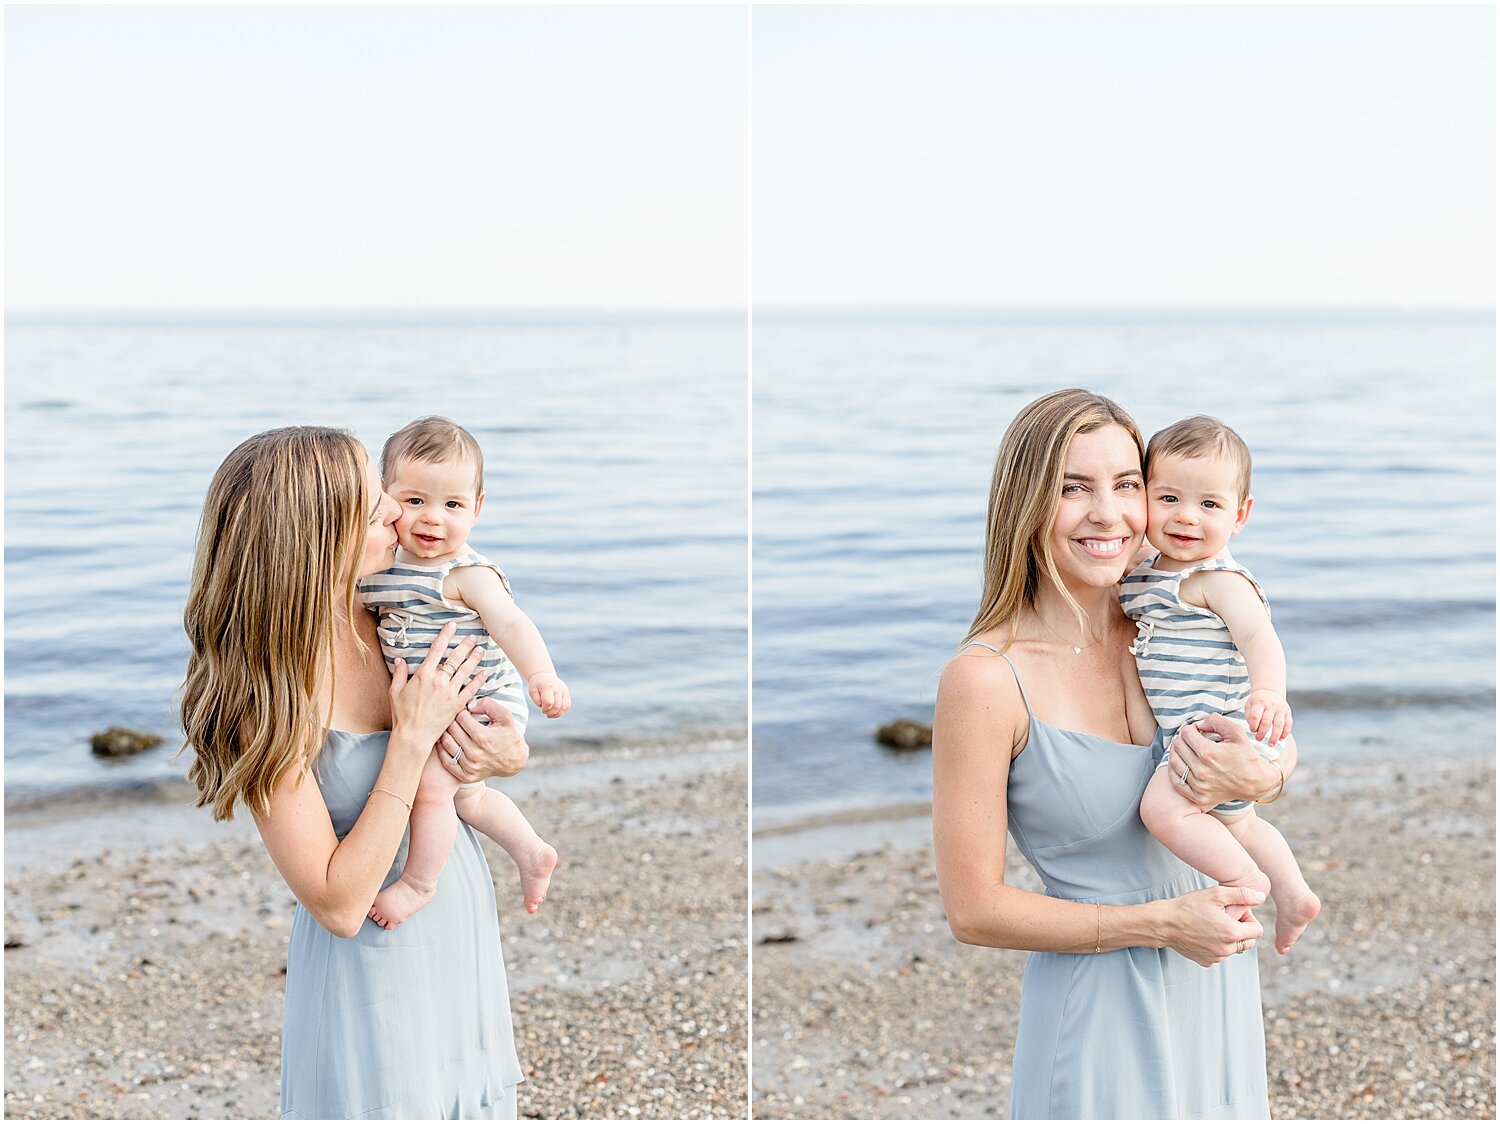 6 month milestone session at Sherwood Island in Westport, CT. Photos by Westport Family Photographer, Kristin Wood Photography.